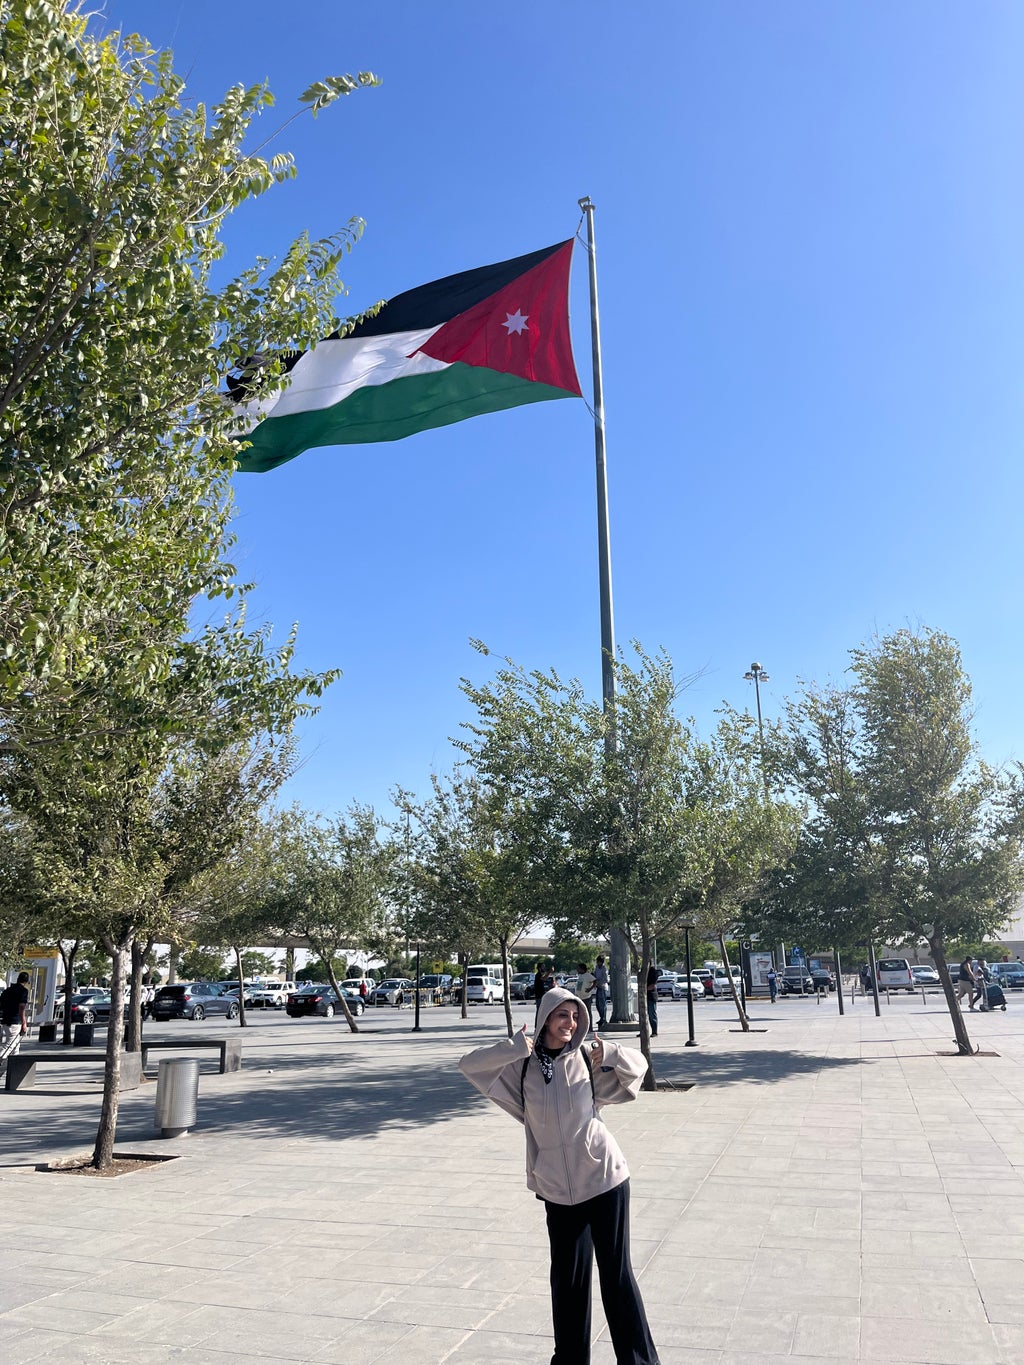 Picture I took of my friend by the Jordanian flag